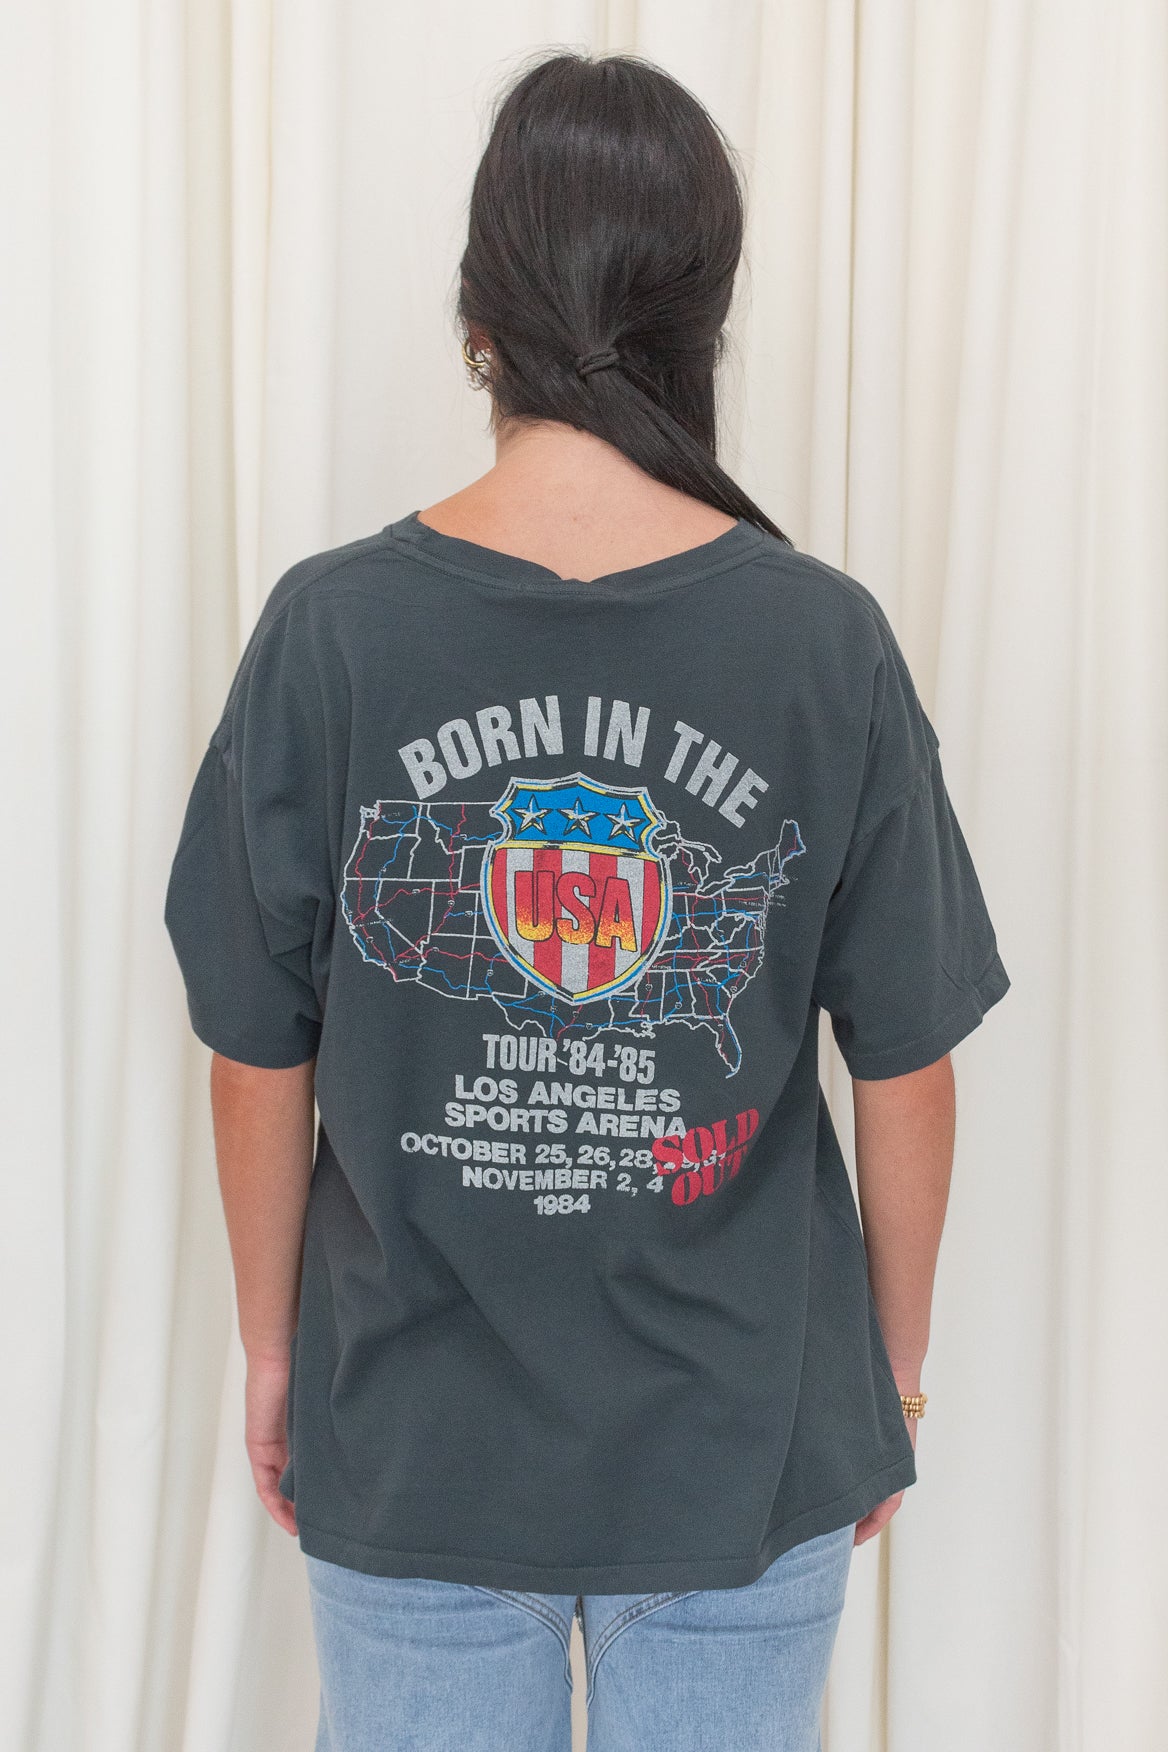 Black graphic tee featuring  Bruce Springsteen's Born in The USA Merch Tee. Crafted with the legendary pink cadillac and 'Born in the U.S.A.' tour logo,